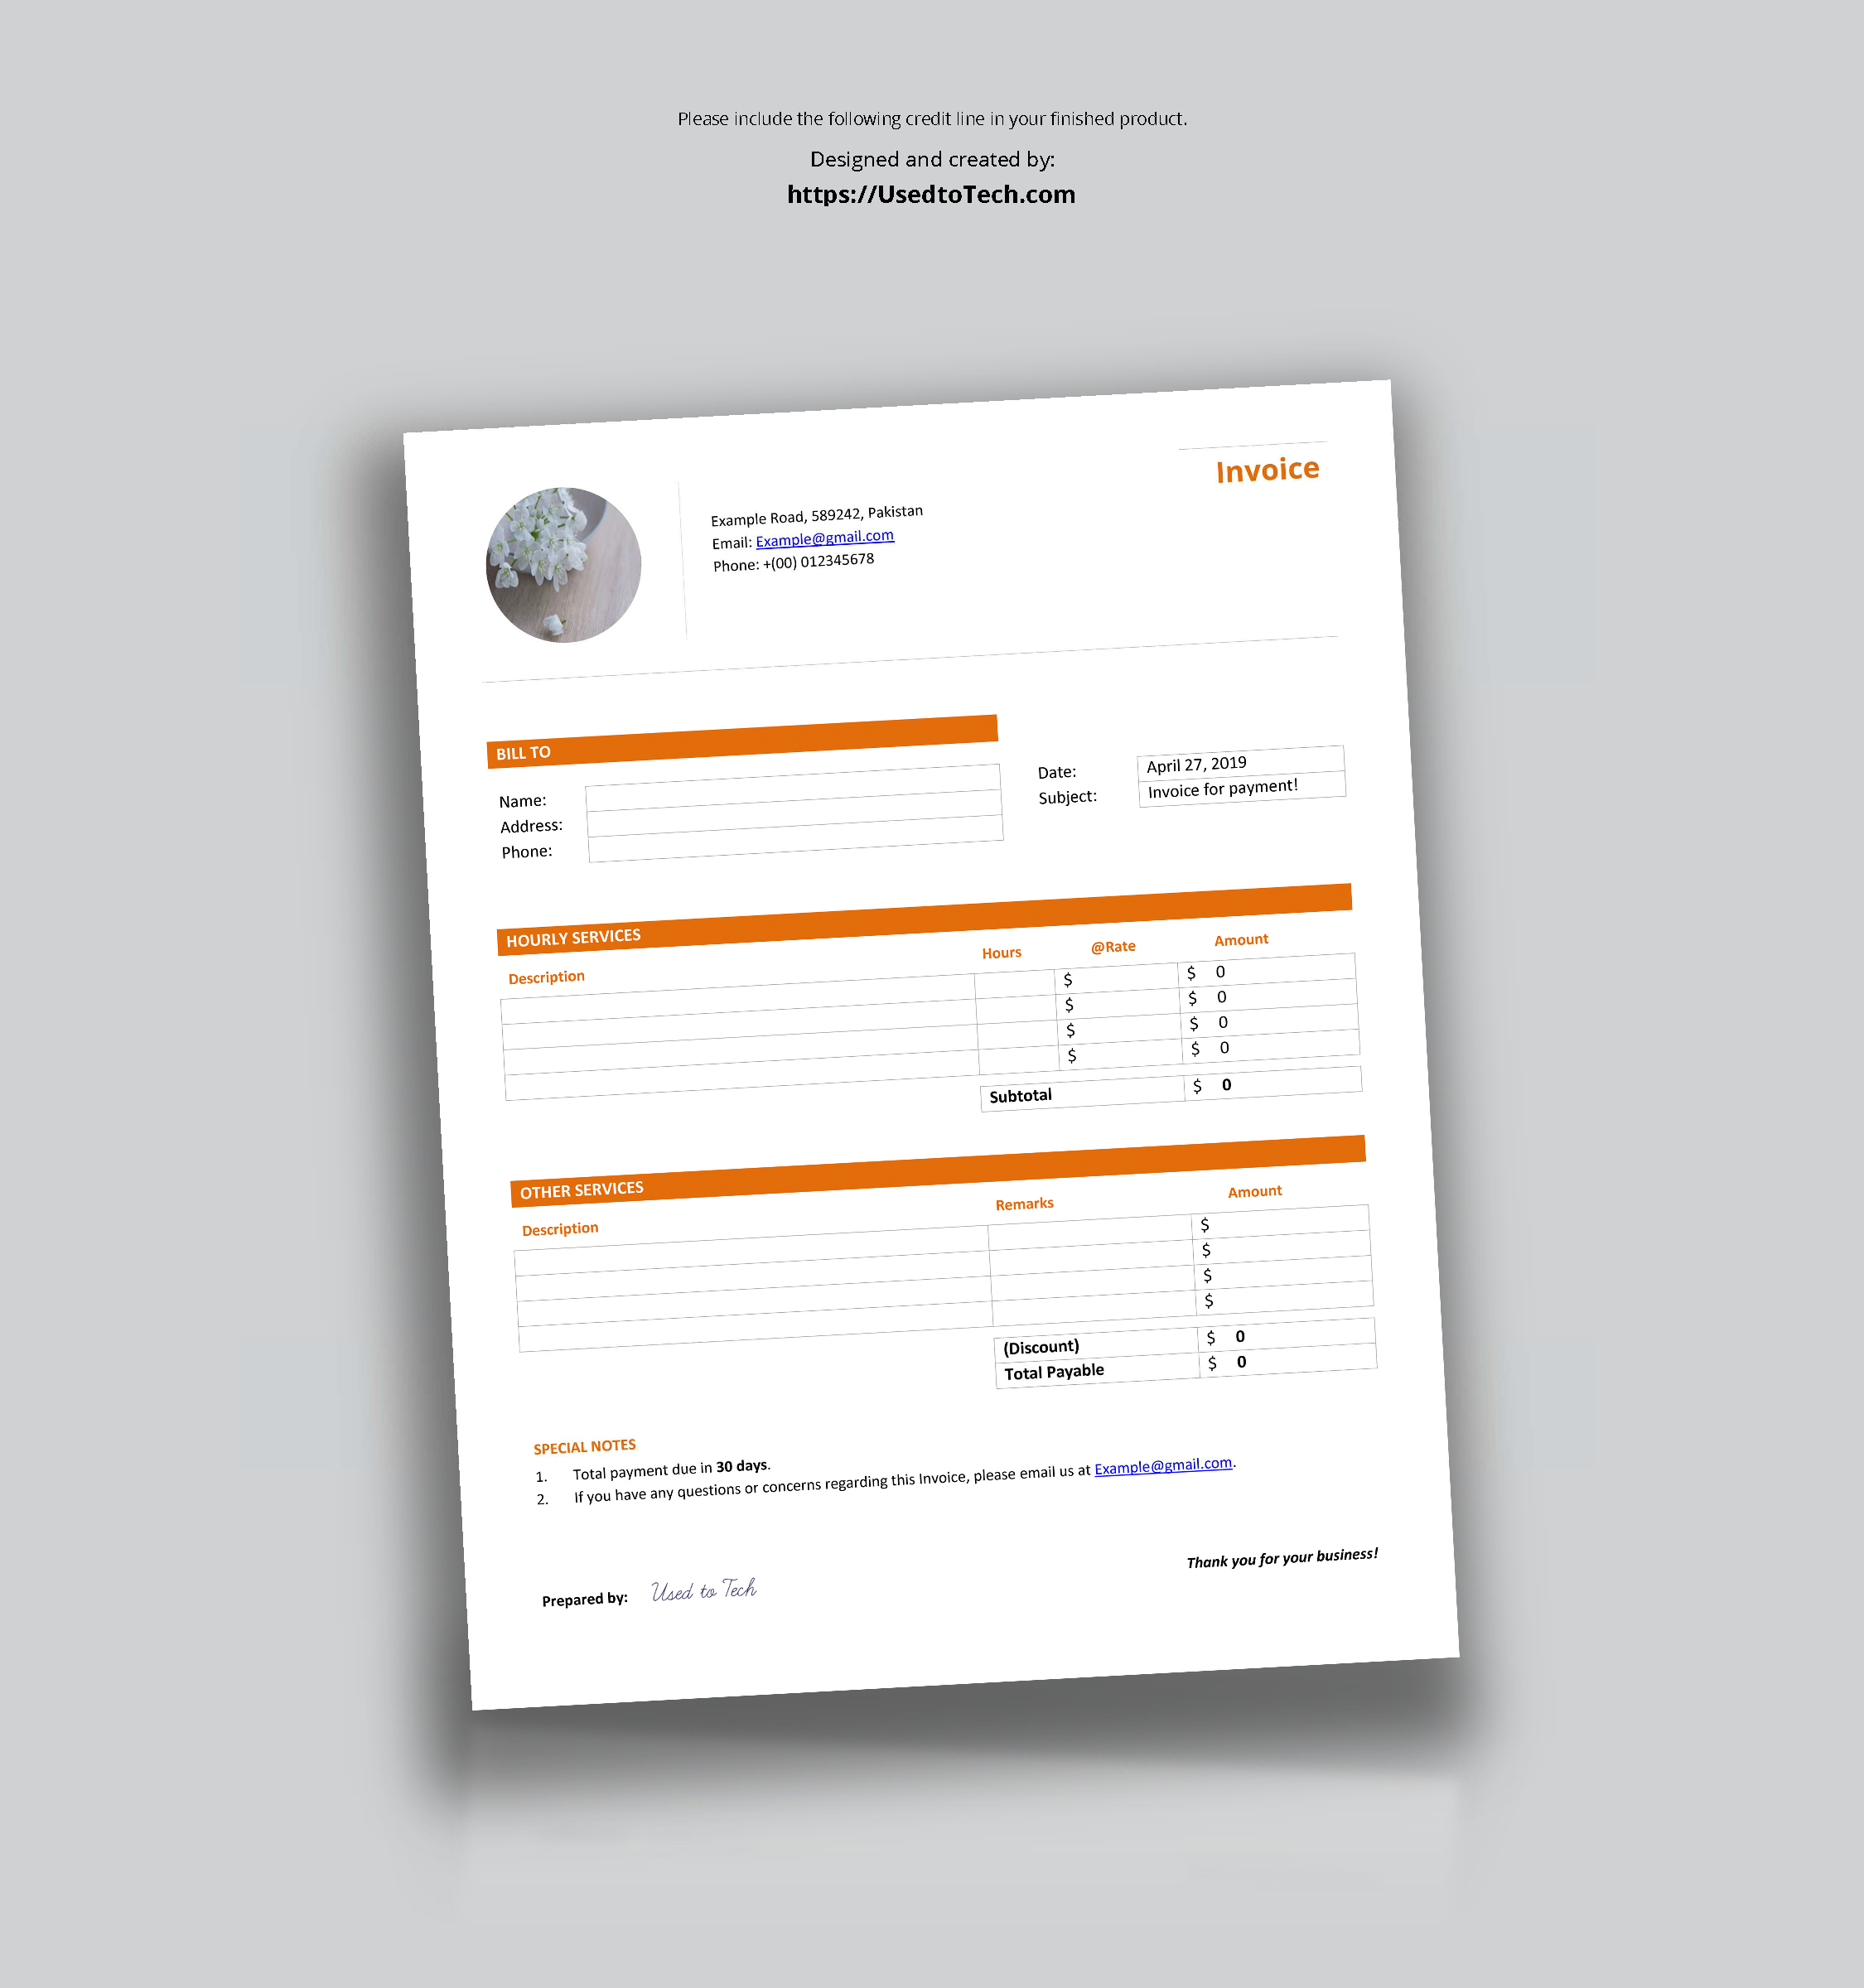 Professional Looking & Free Invoice Template In Word – Used Throughout Header Templates For Word